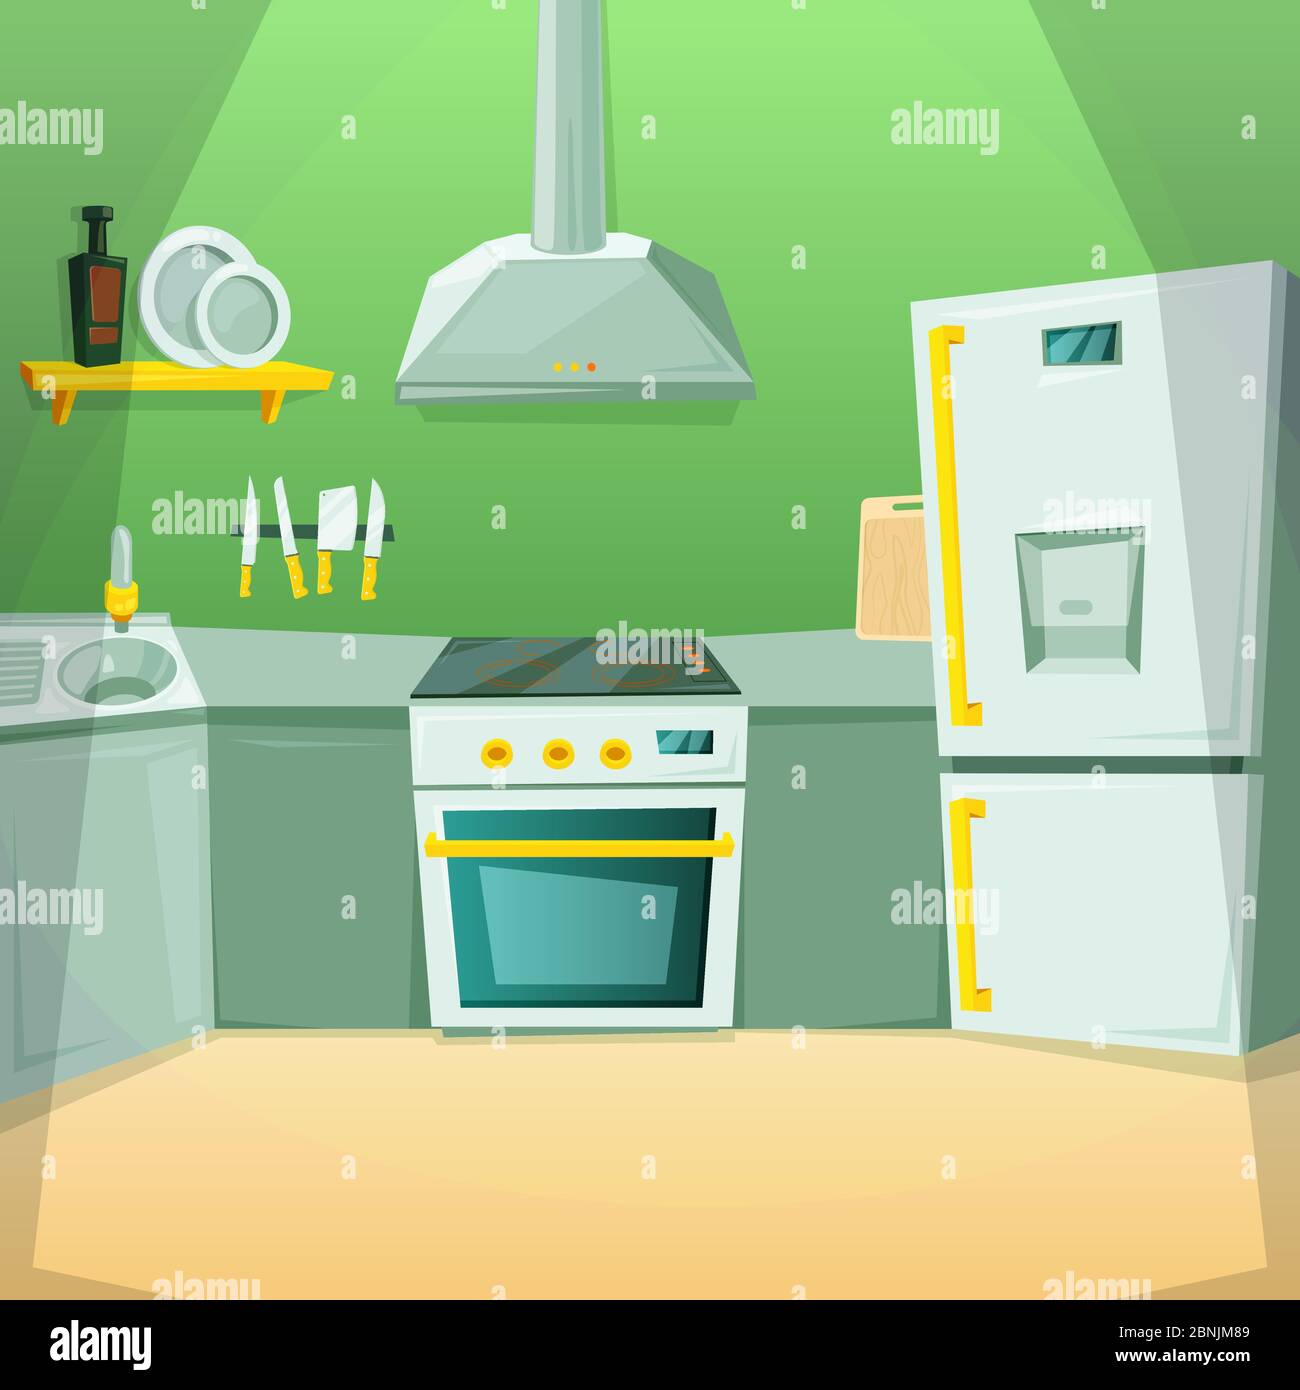 Cartoon pictures of kitchen interior with different furniture items Stock Vector